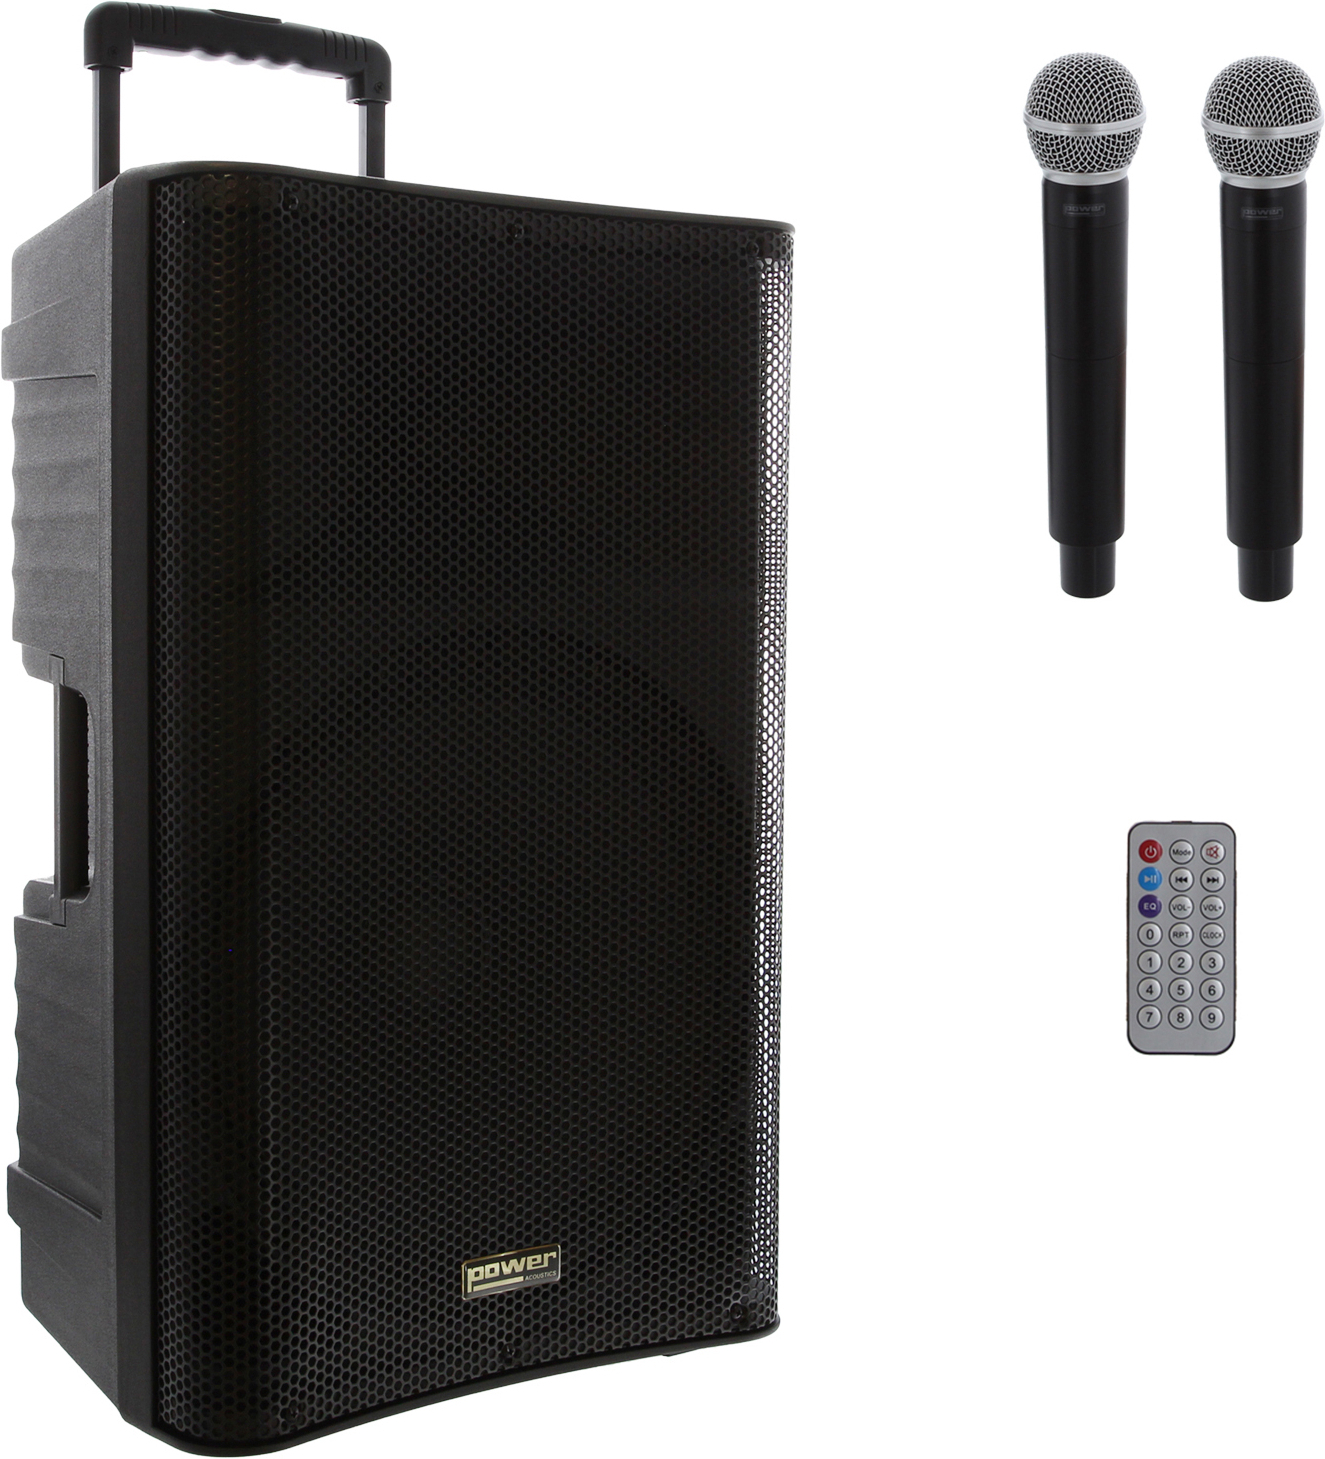 Power Acoustics Taky 15 Media - Portable PA system - Main picture